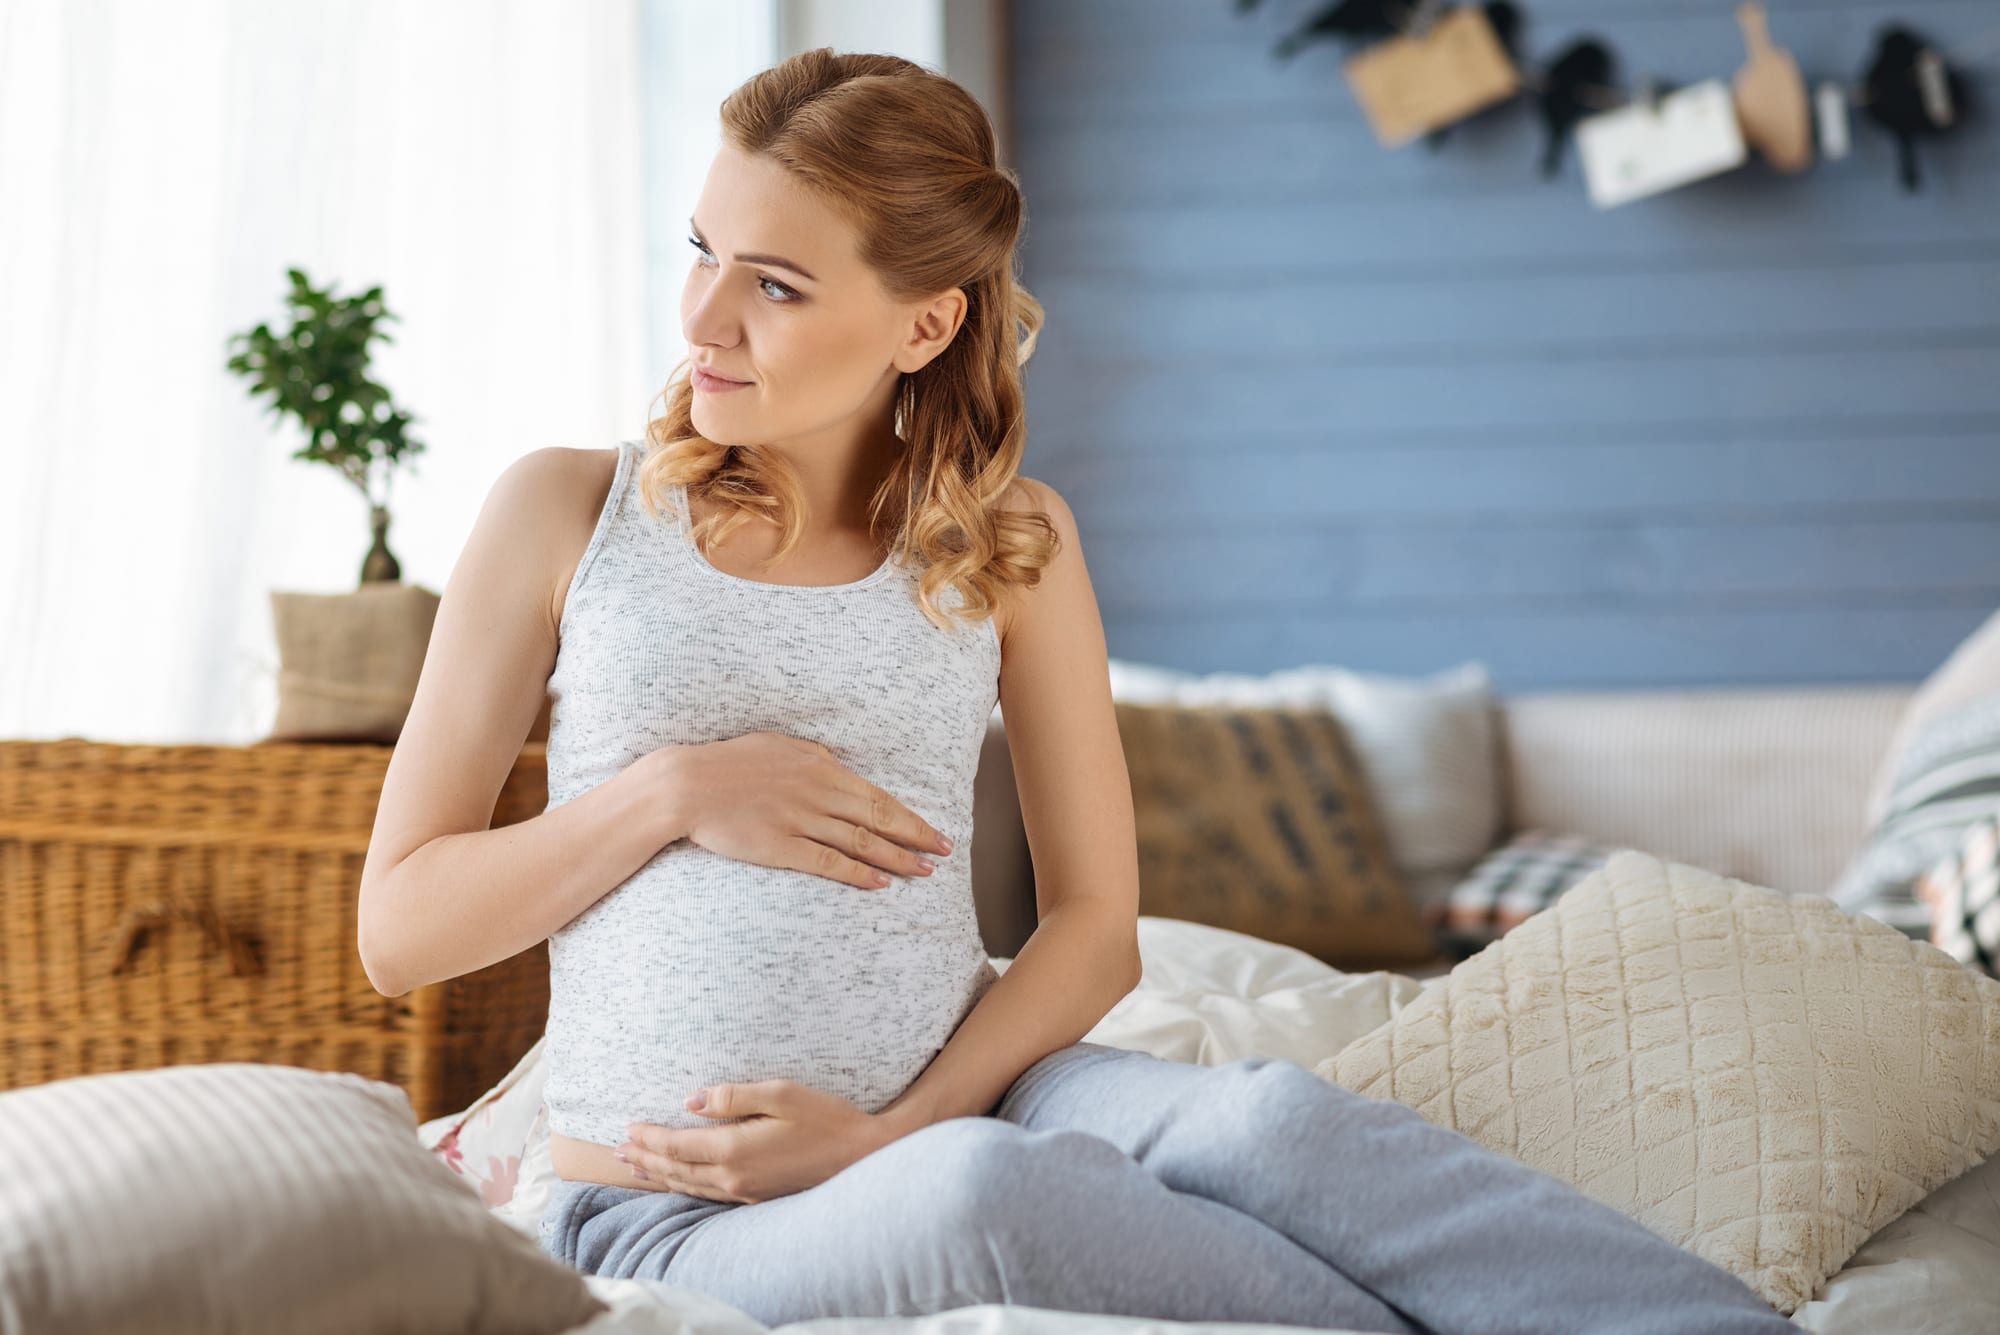 signs of preeclampsia that you need to know #childbirth #pregnancy #preeclampsia #pregnancydangersigns #miscarriage